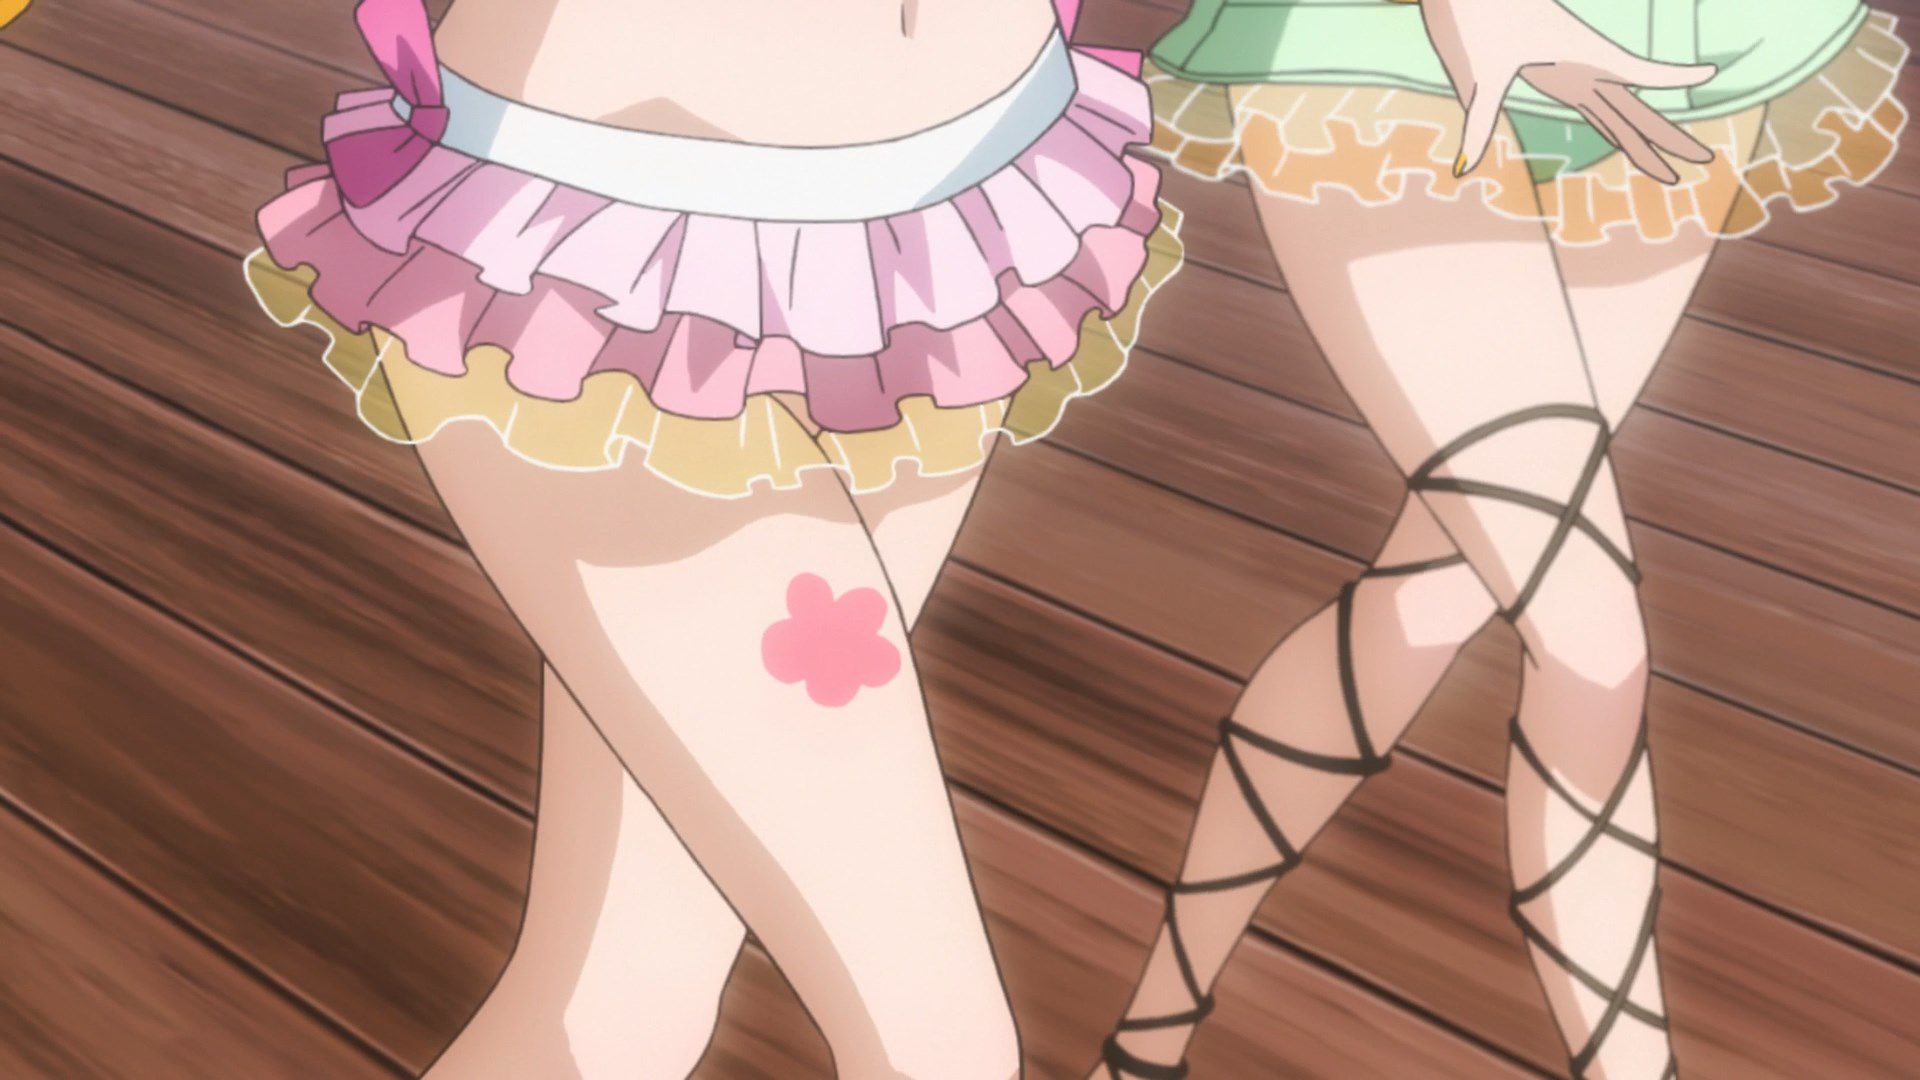 [God images] "love live! ' Μm ' PV's leg is too erotic everyone wakes up to a leg fetish of wwwww 12